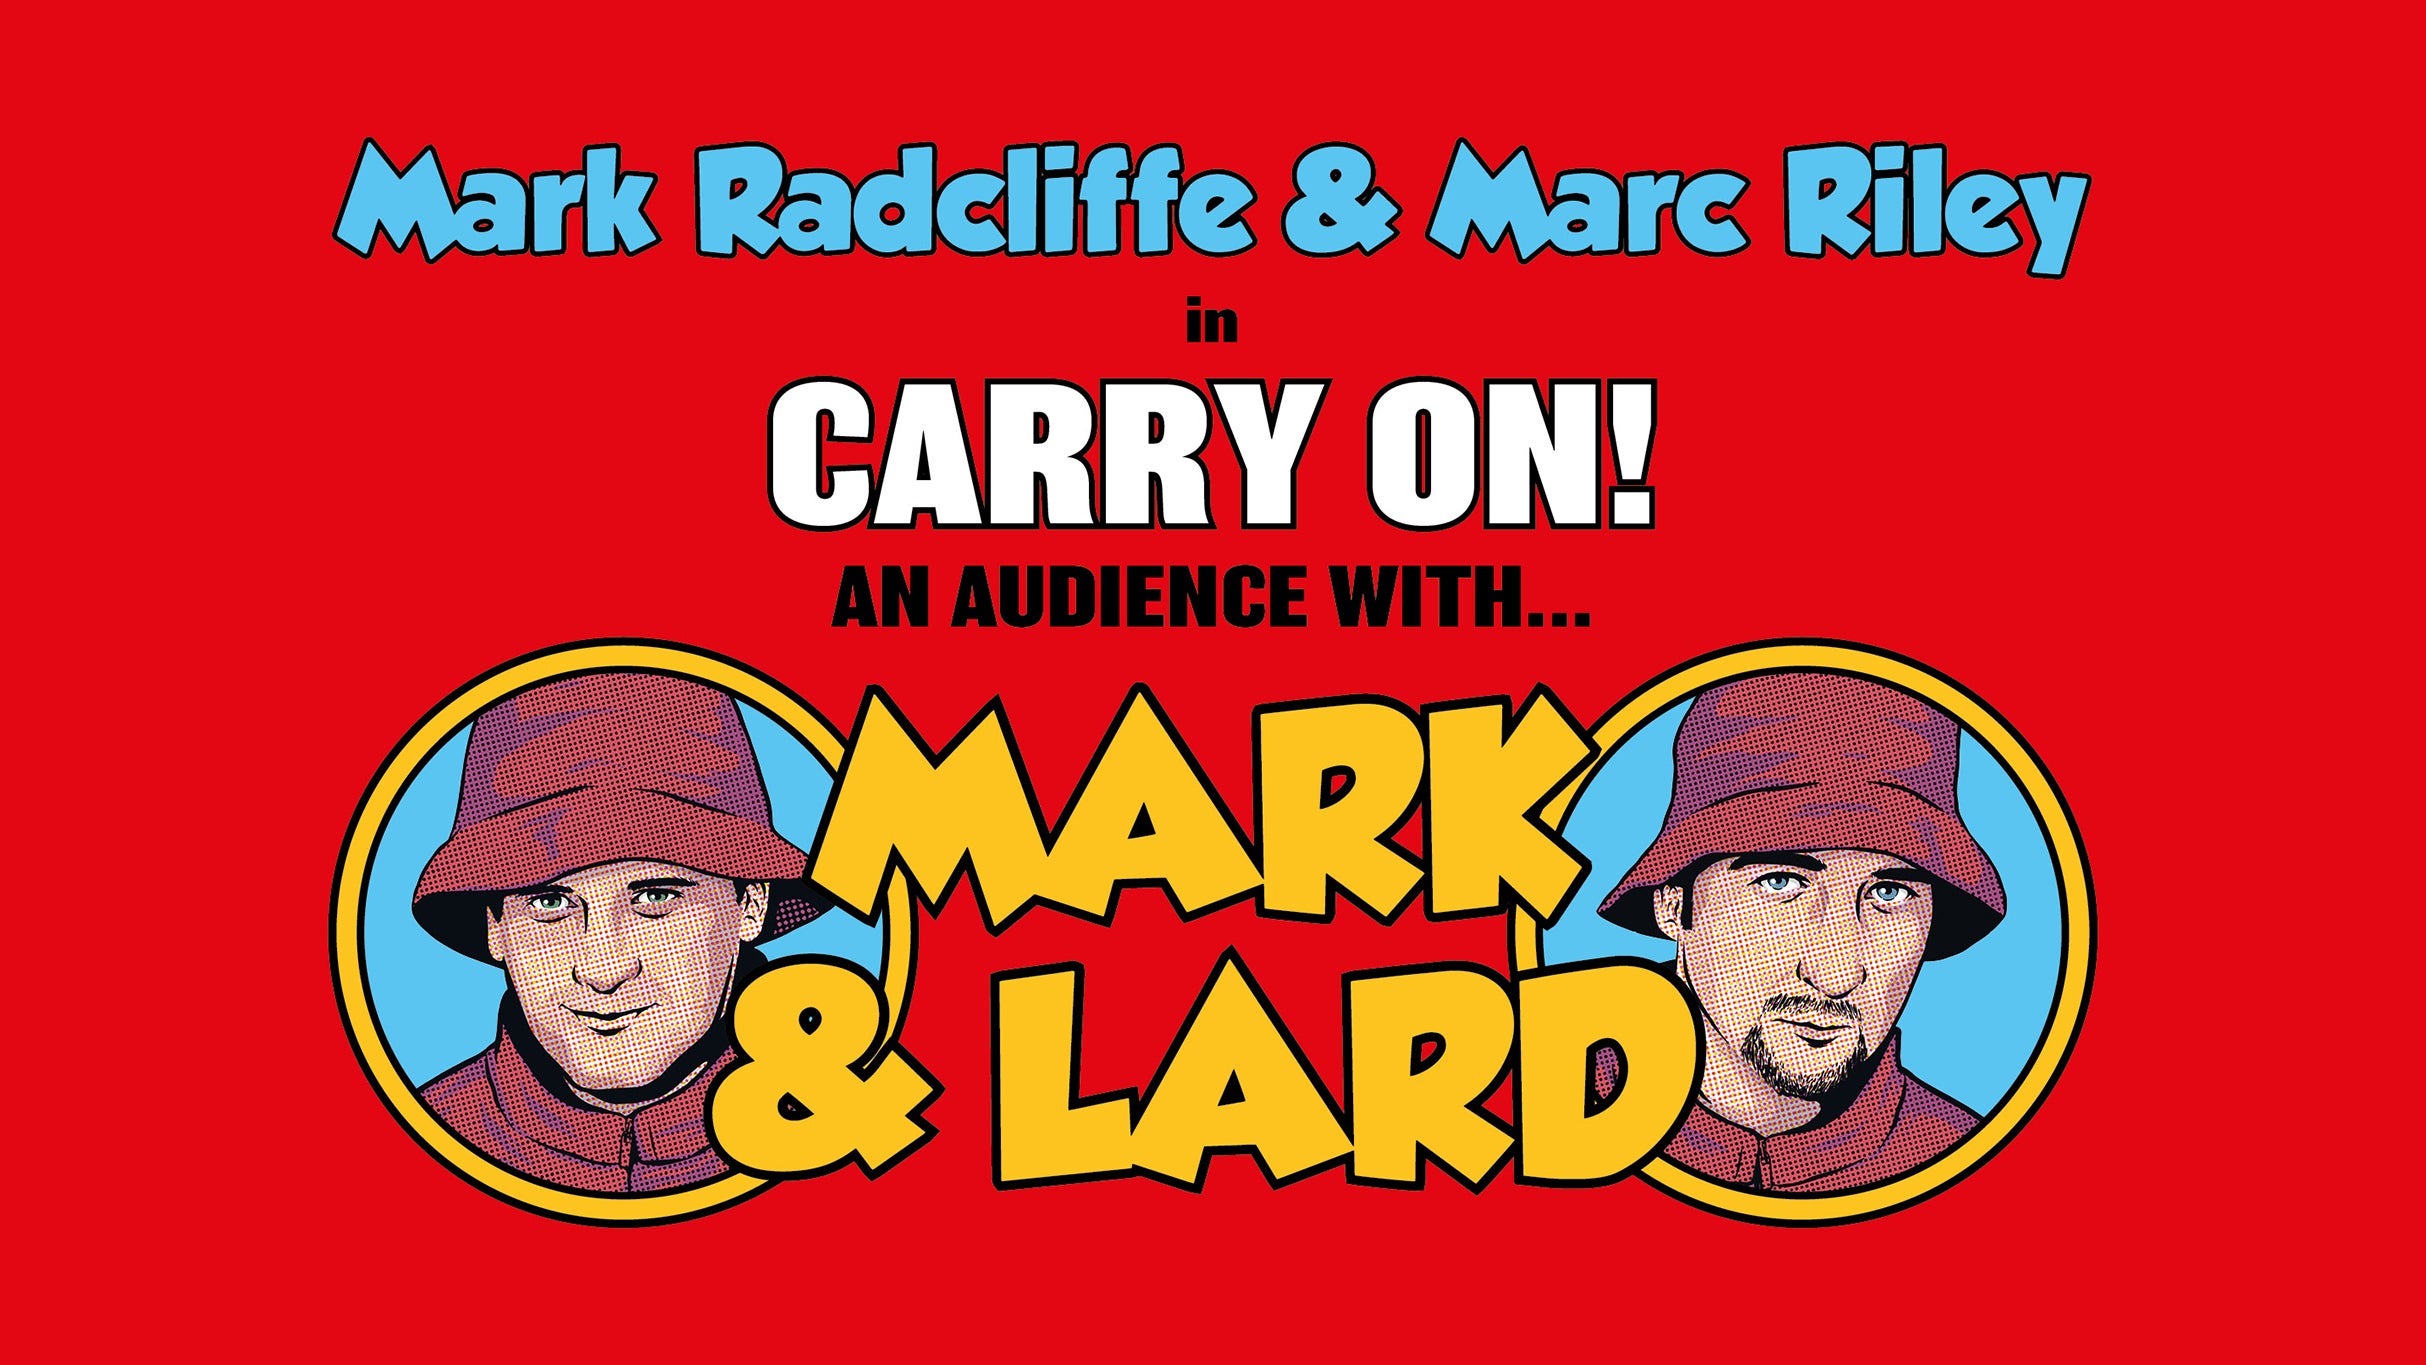 An Audience with Mark and Lard in Birmingham promo photo for Ticketmaster presale offer code